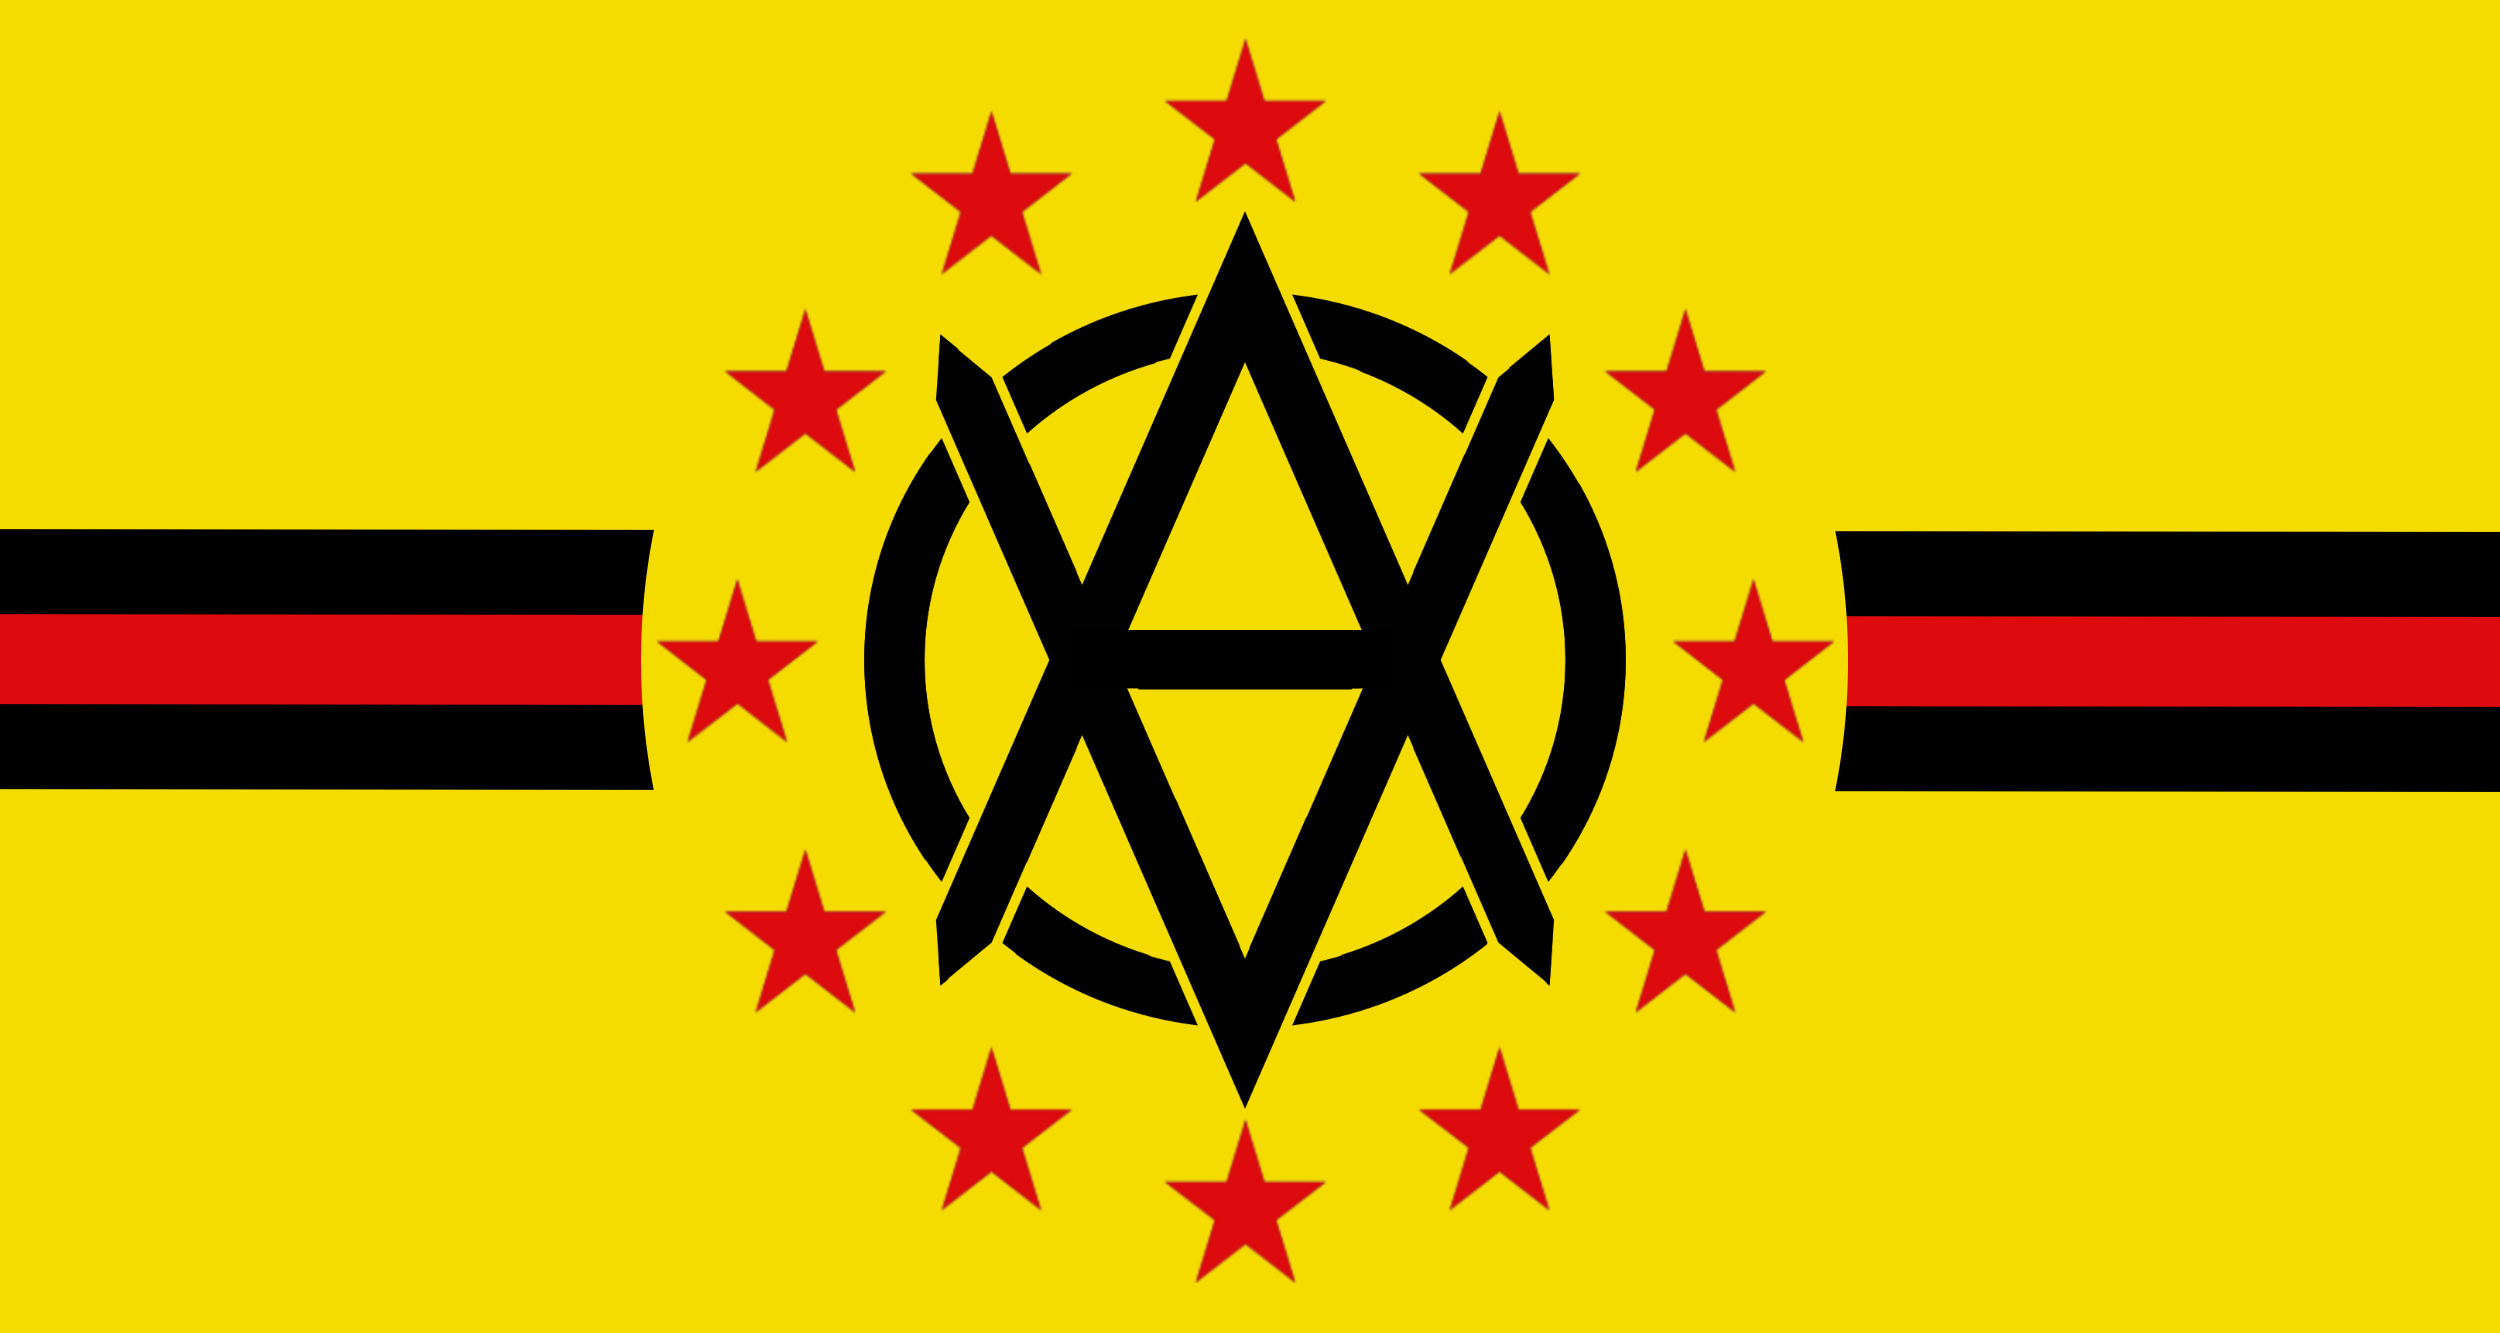 ANARCHO.png